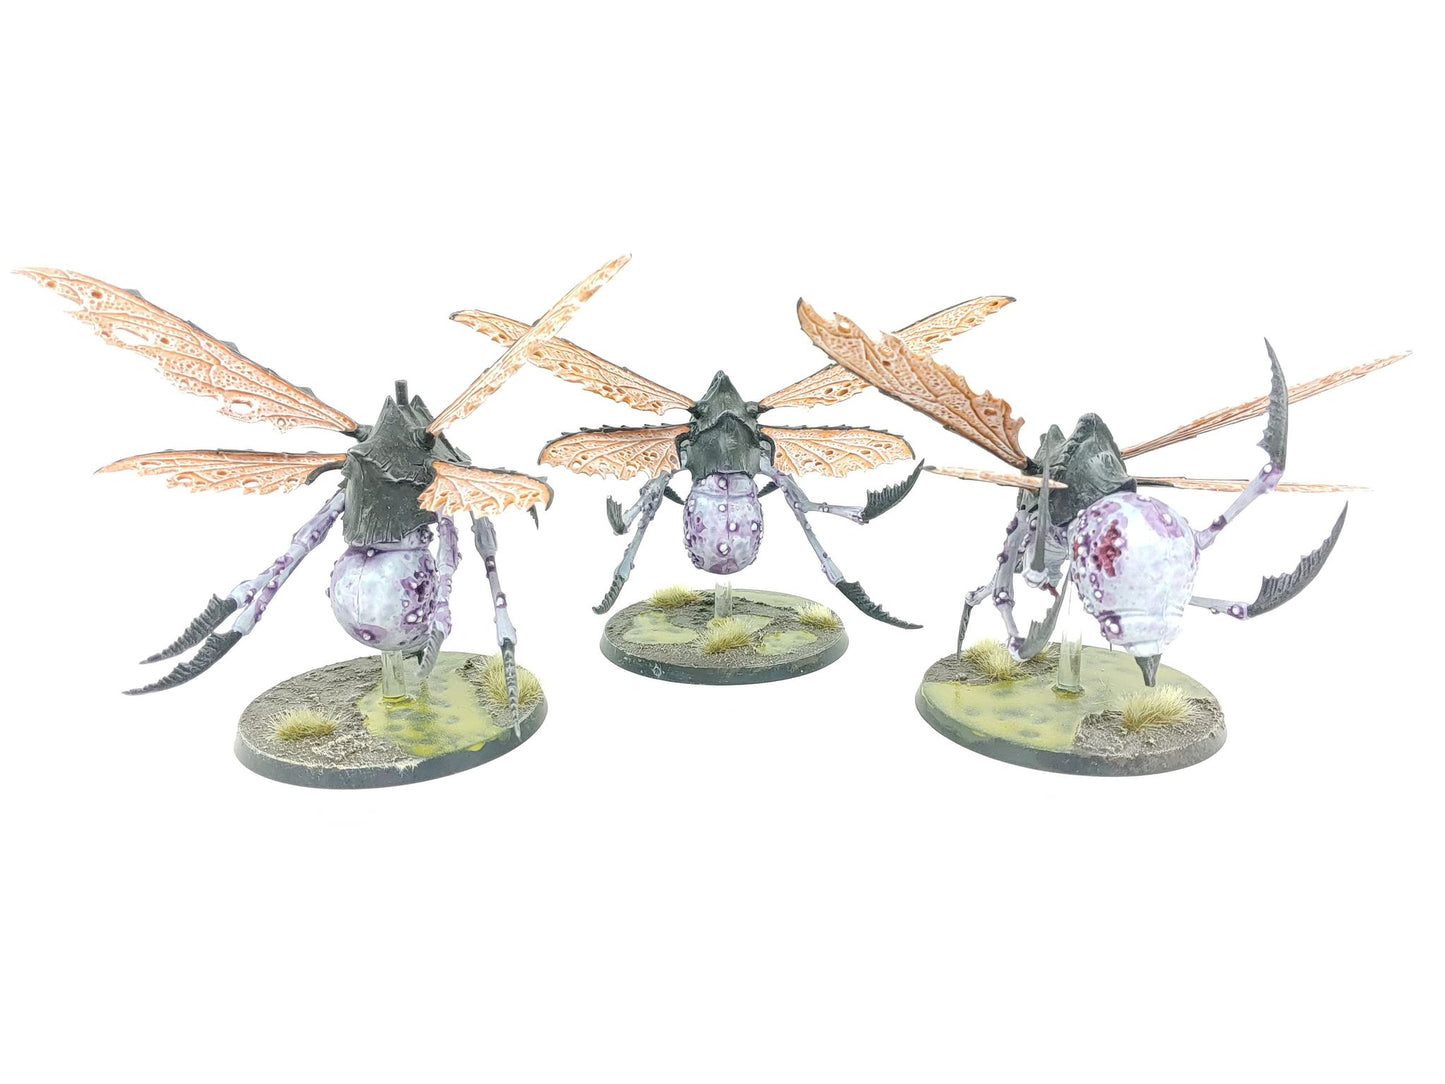 Plague Drones of Nurgle (Well Painted)